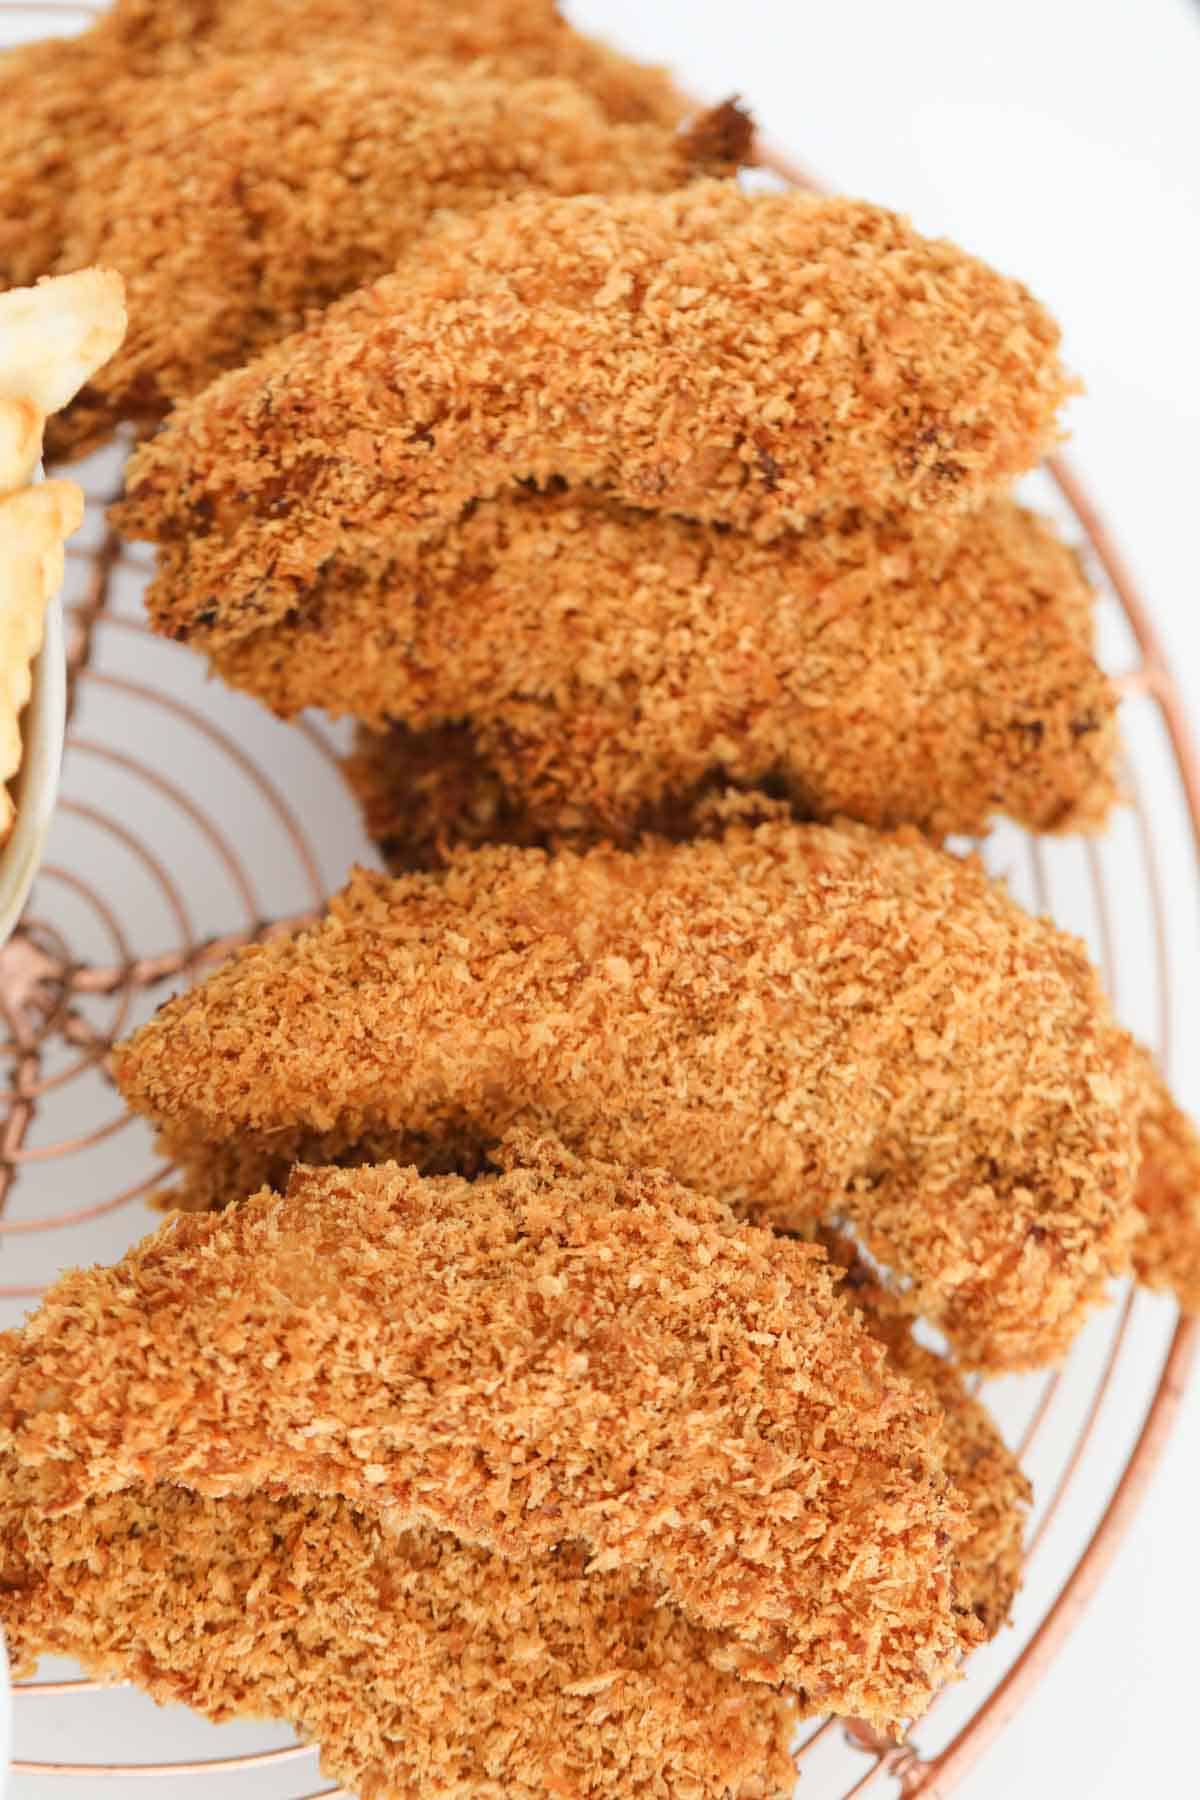 A close up of crispy breaded chicken tenders placed on a wire rack.